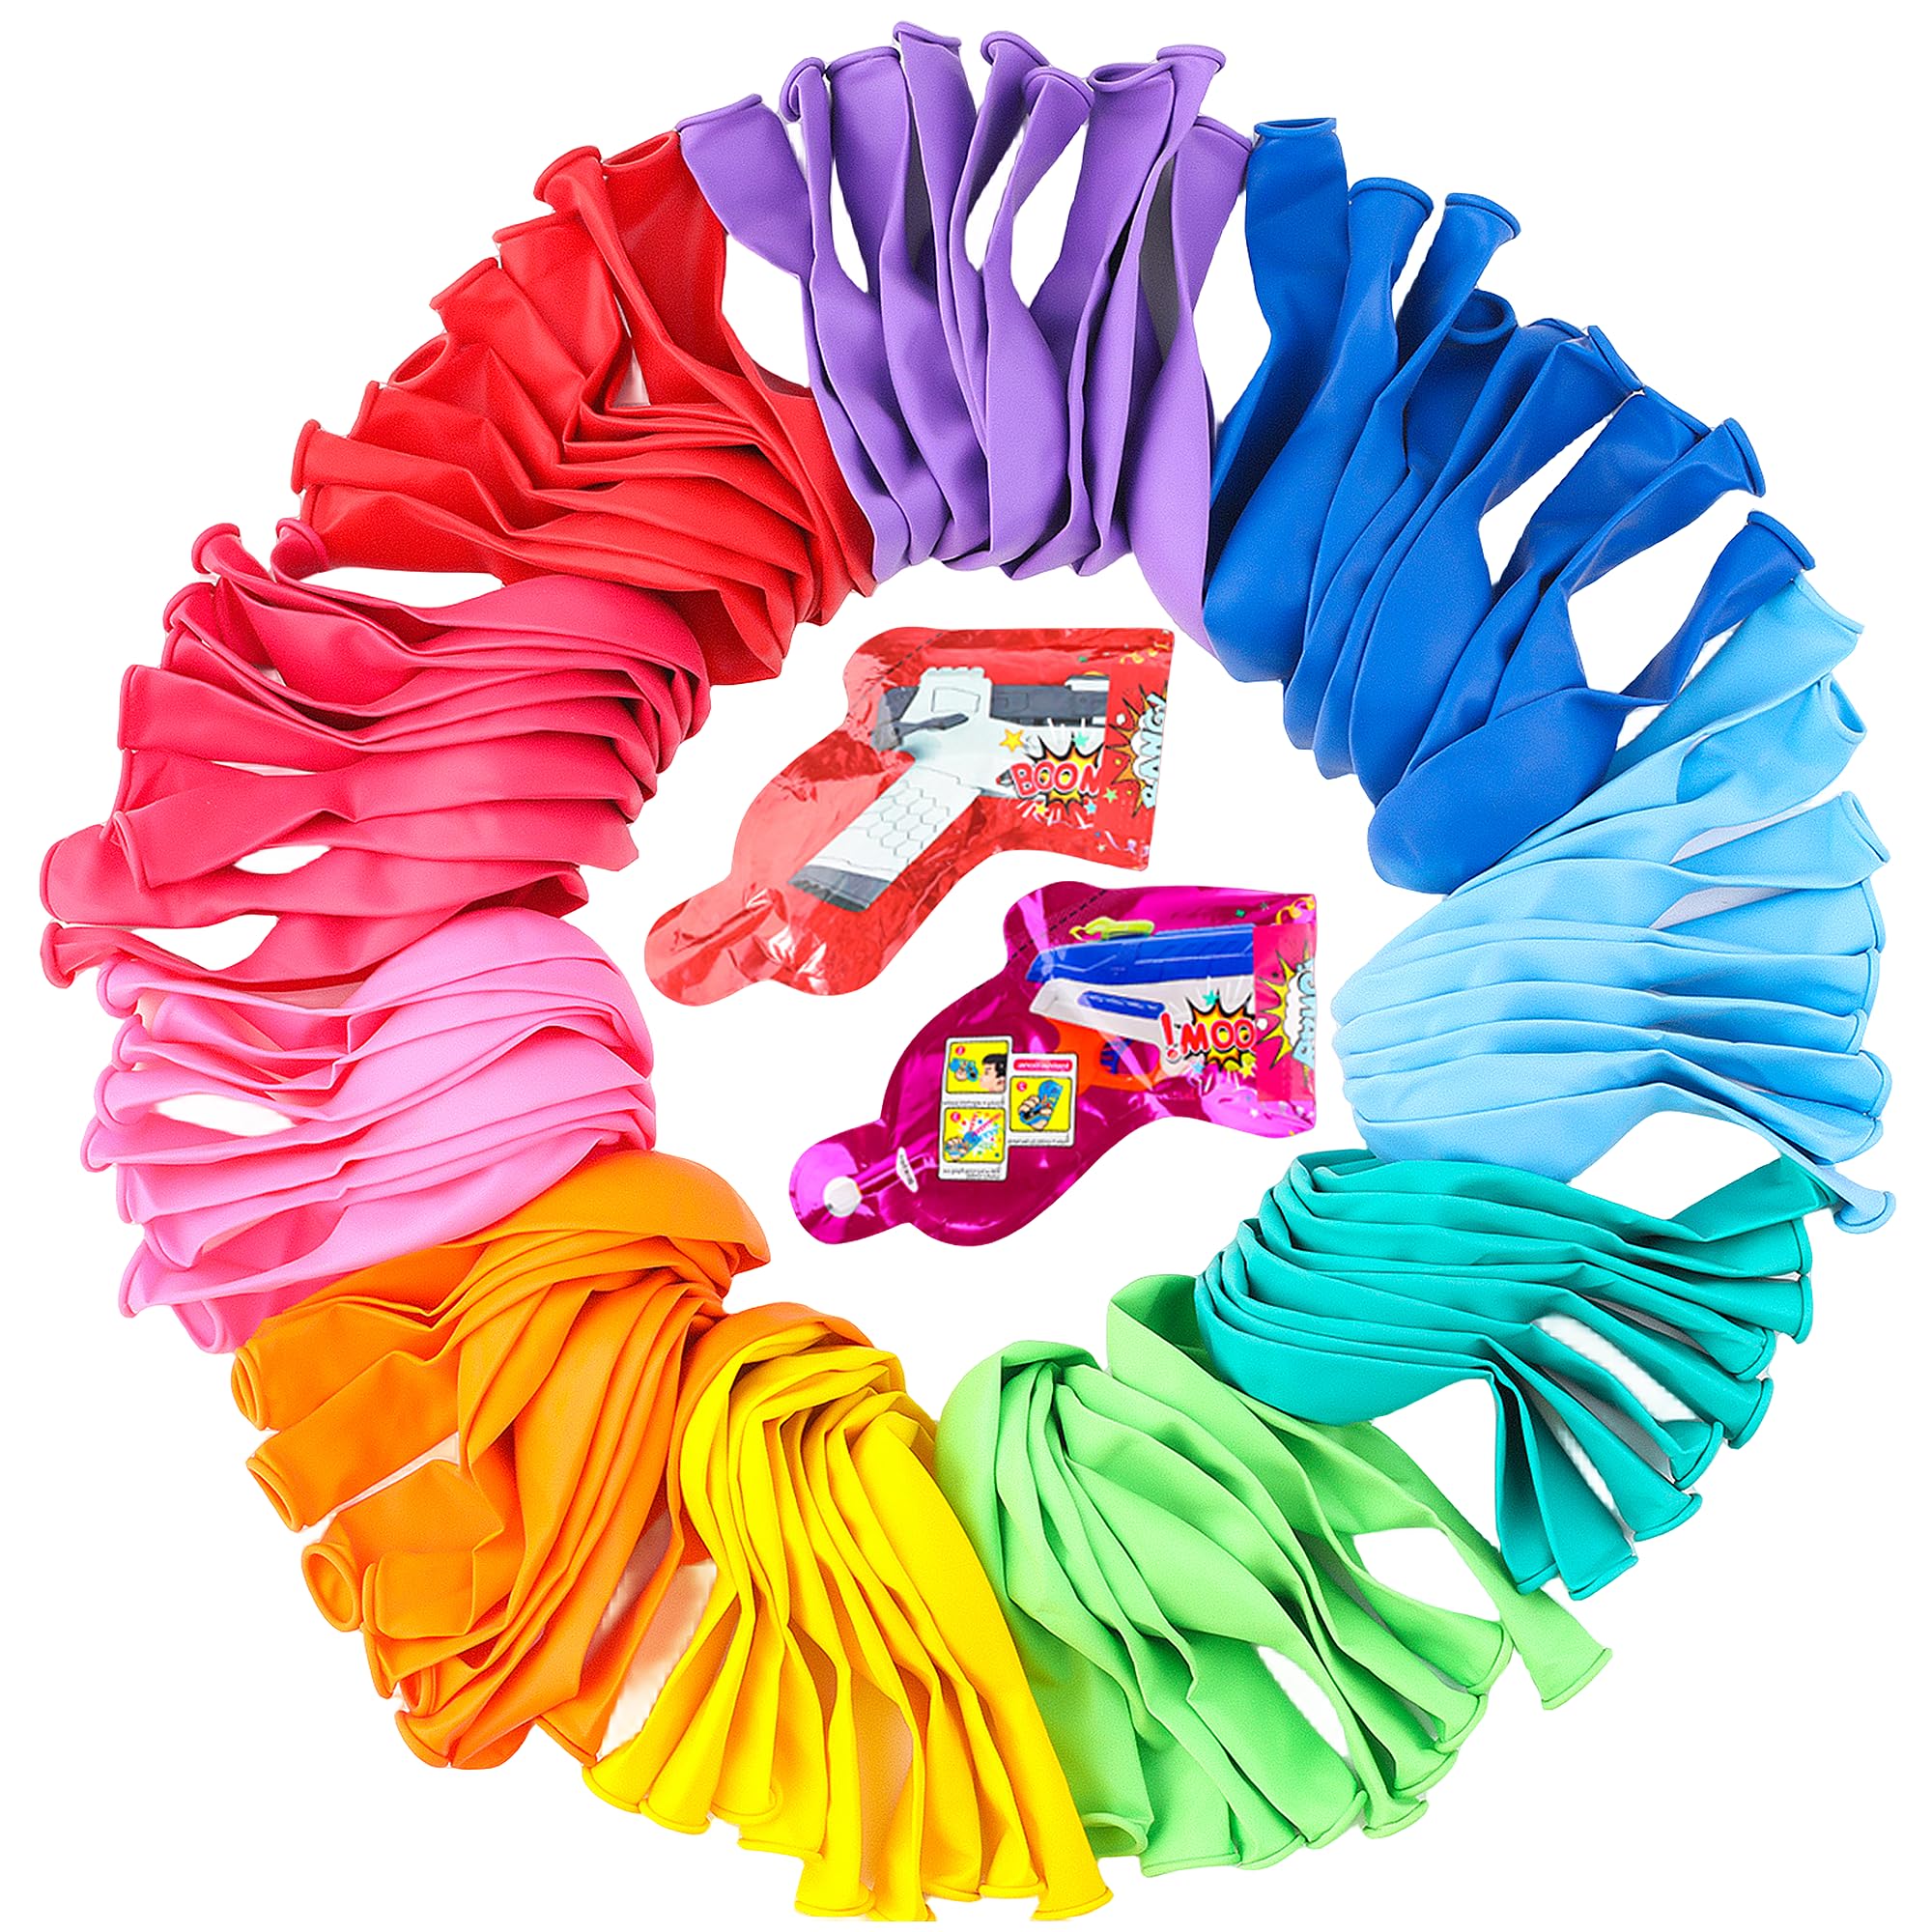 Colorful Balloons 100 PCS, Assorted Color 12 Inches Rainbow Latex Balloons with Bonus Confetti, 10 Bright Colors Party Balloons for Birthday, Wedding, Baby Shower, Decoration (Round-100)